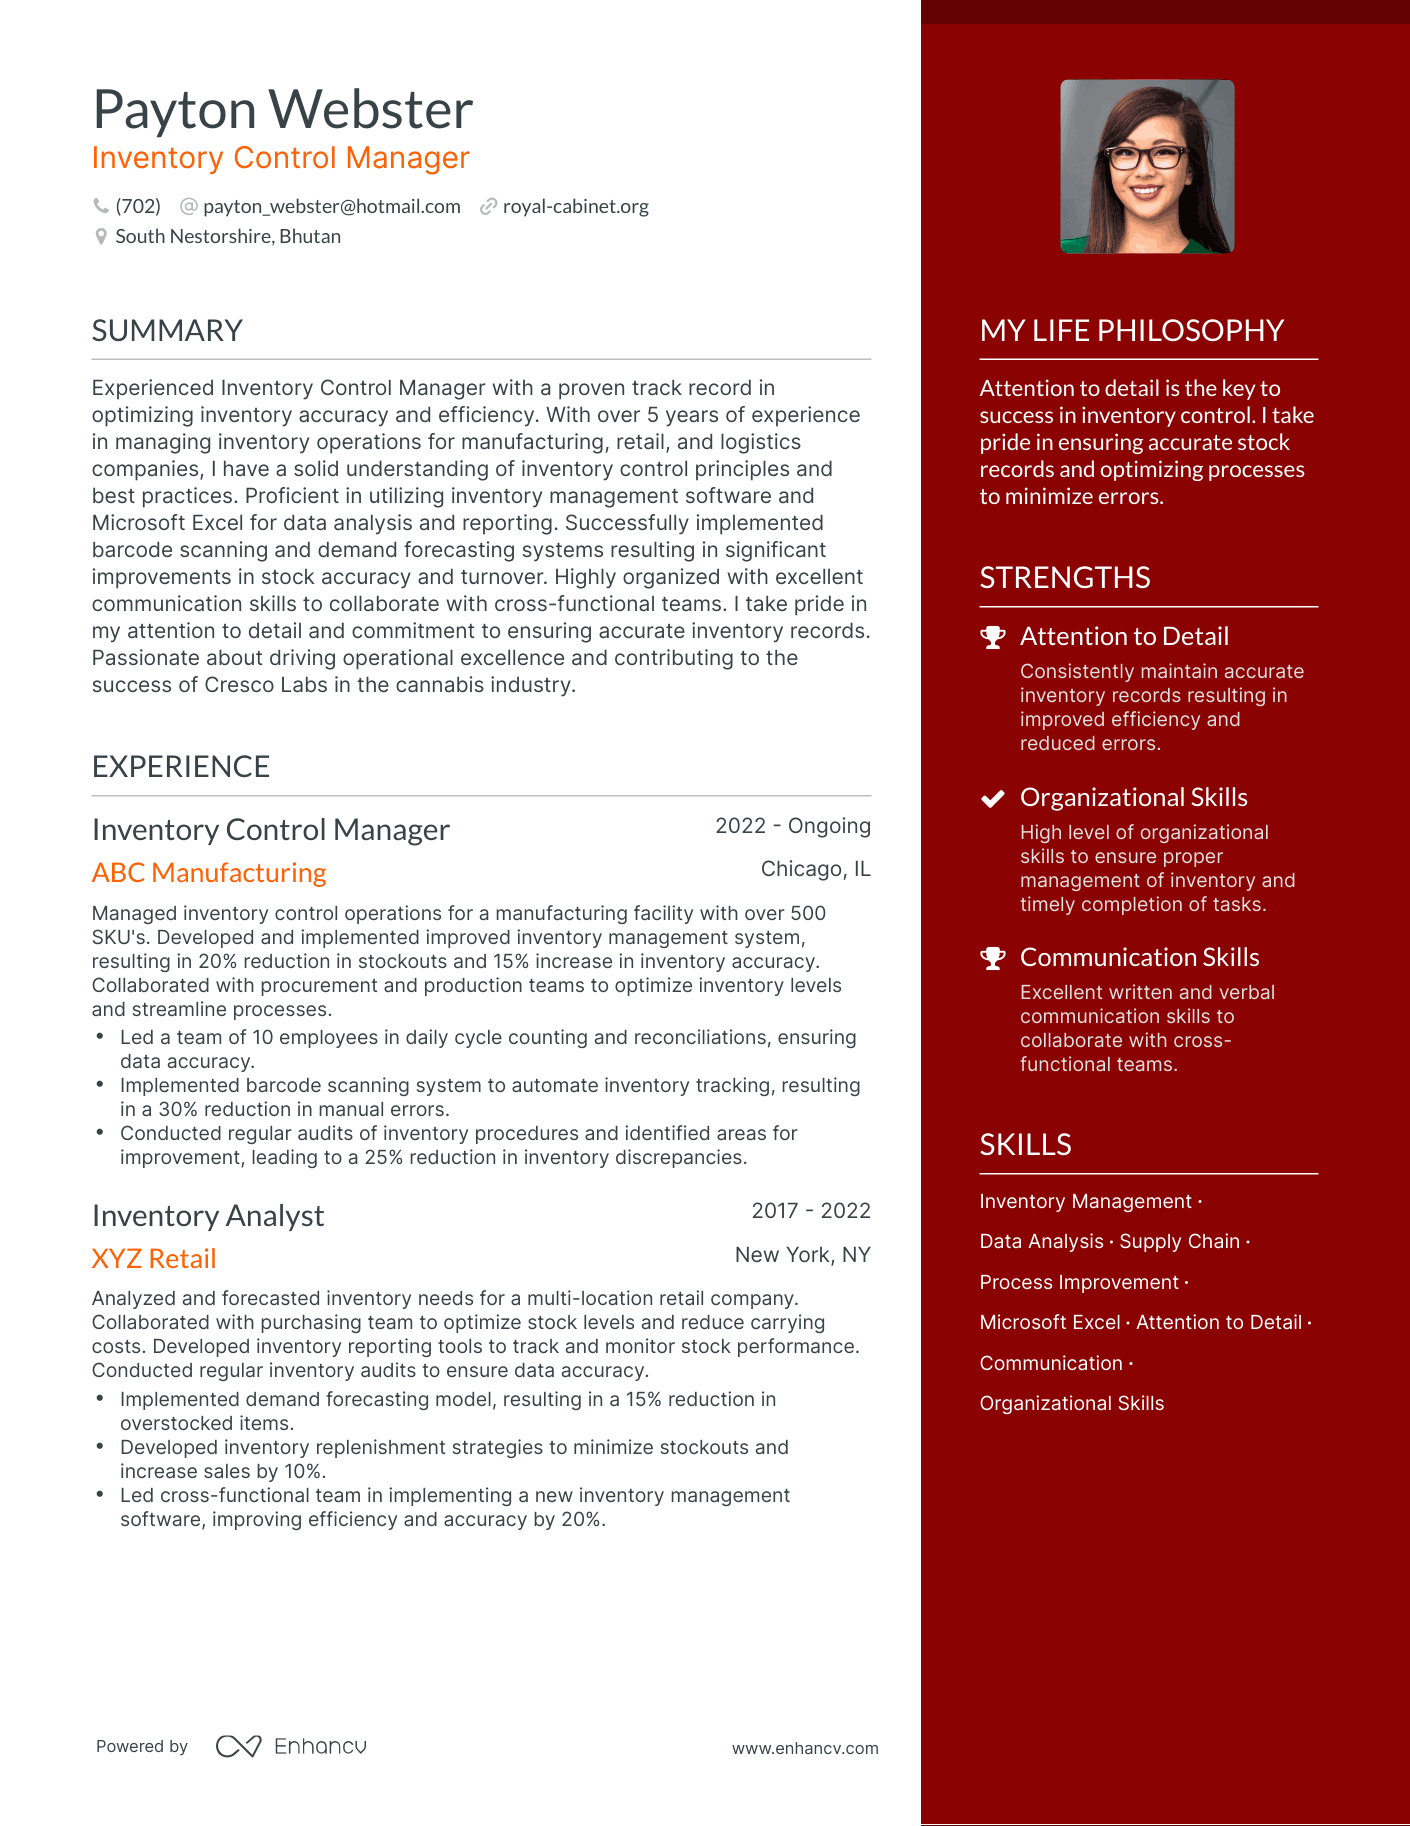 Inventory Control Manager resume example